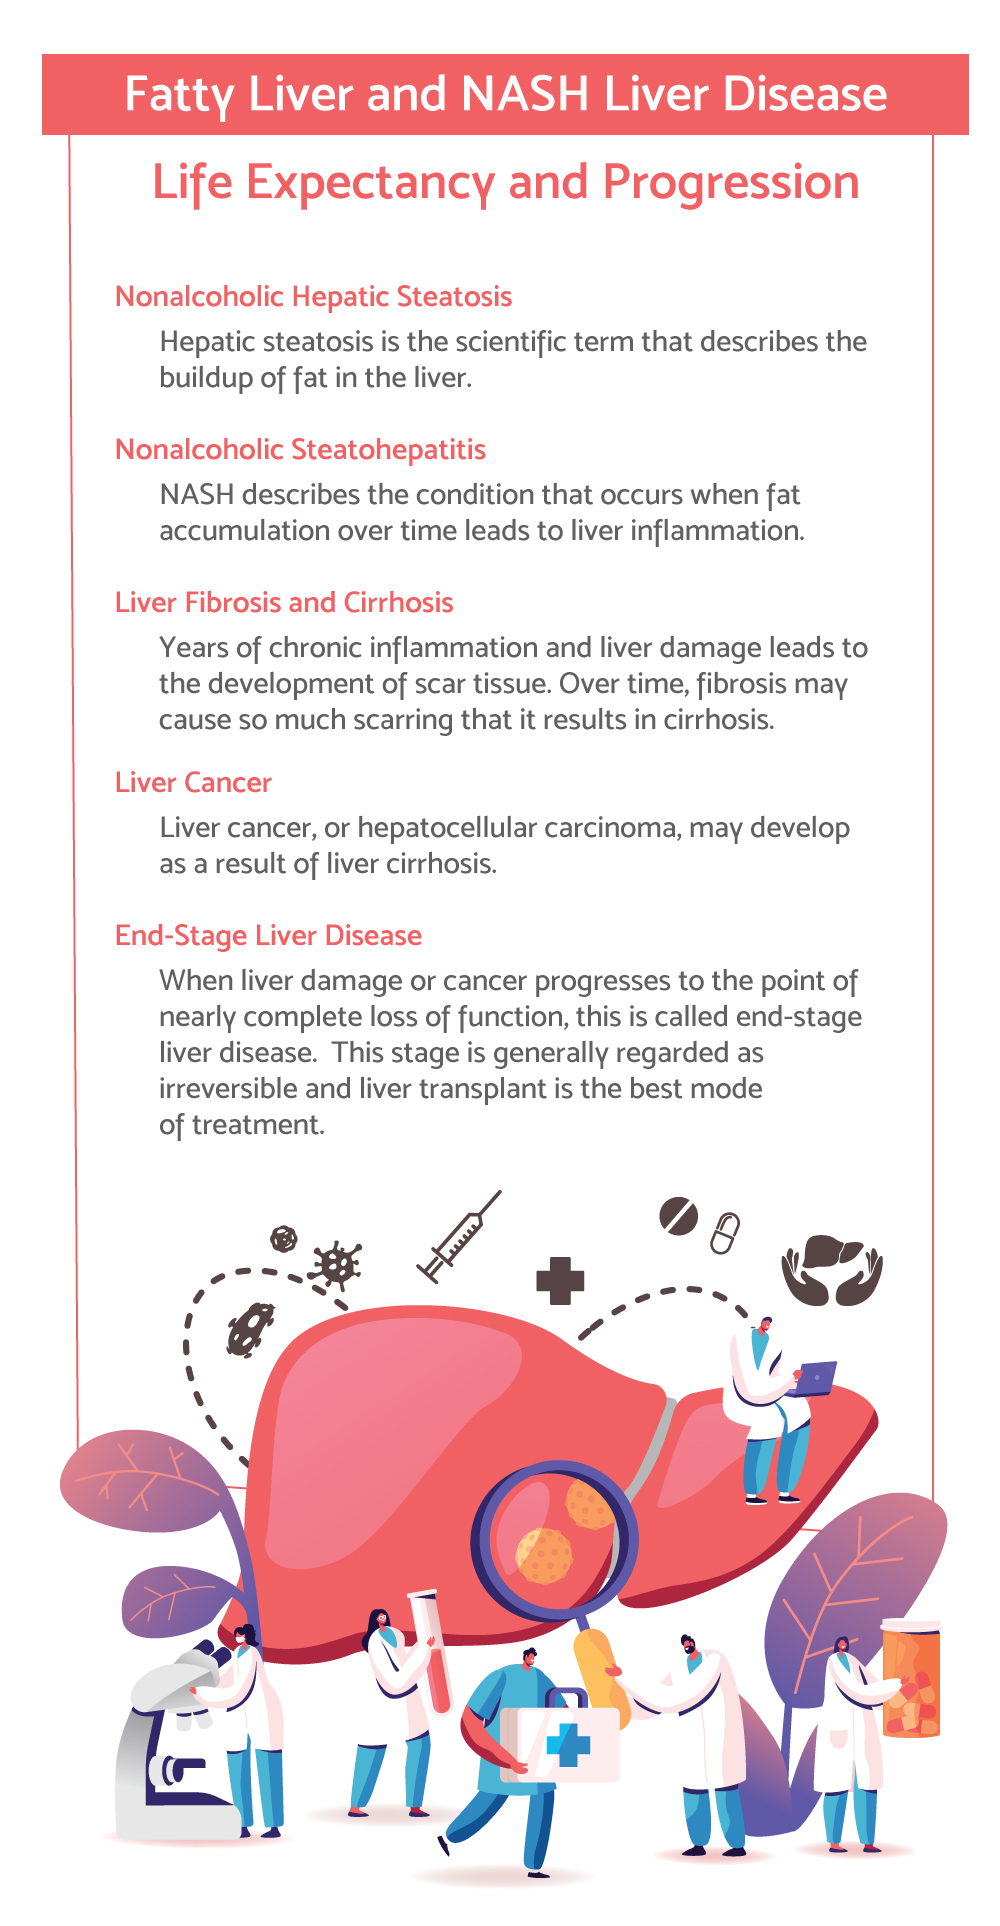 Fatty Liver and NASH Liver Disease Life Expectancy and Progression